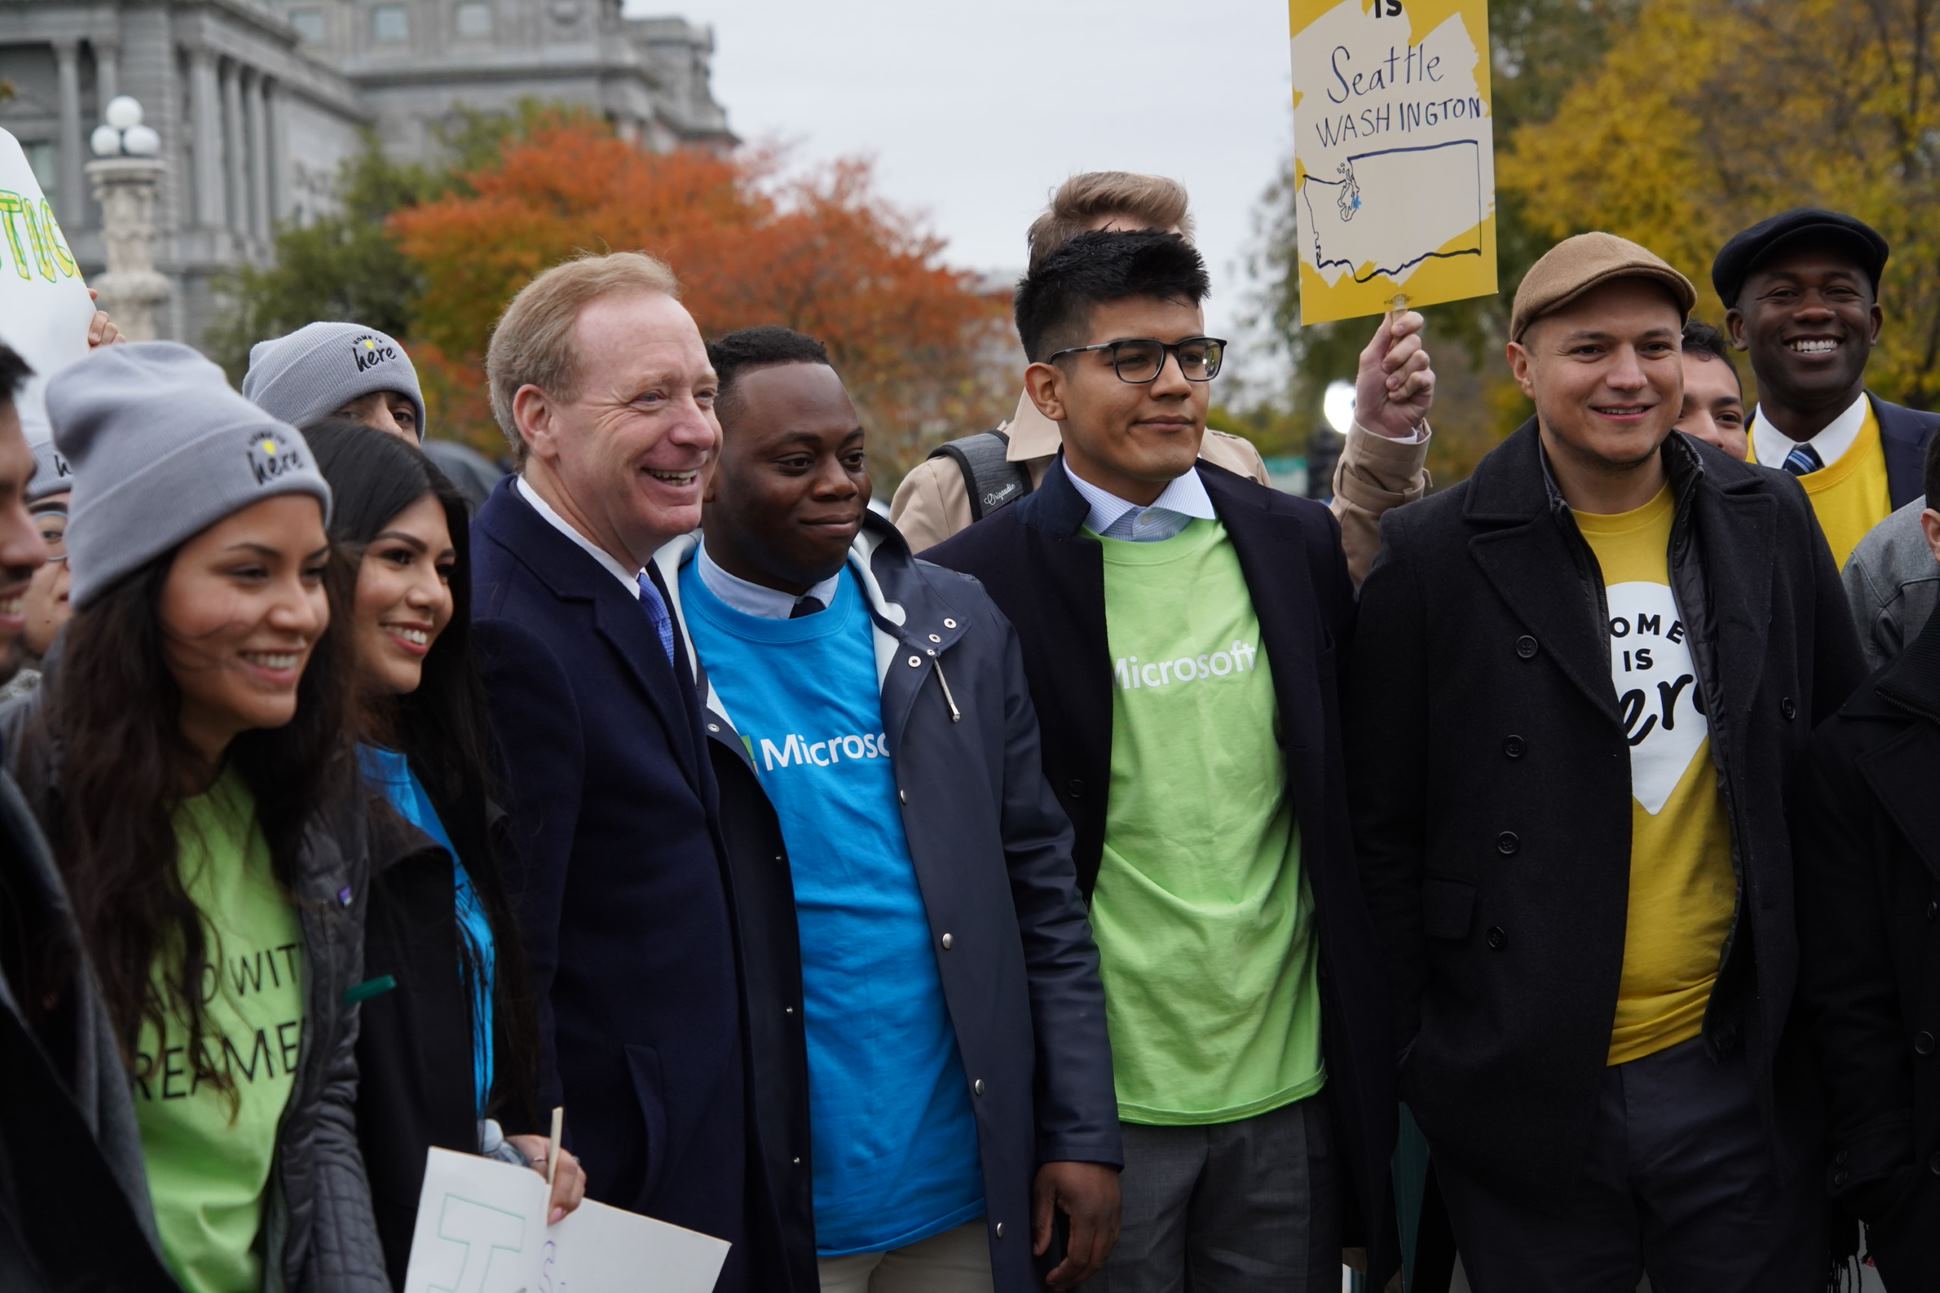 Brad Smith with Microsoft Employees Outside the Supreme Court in November 2019